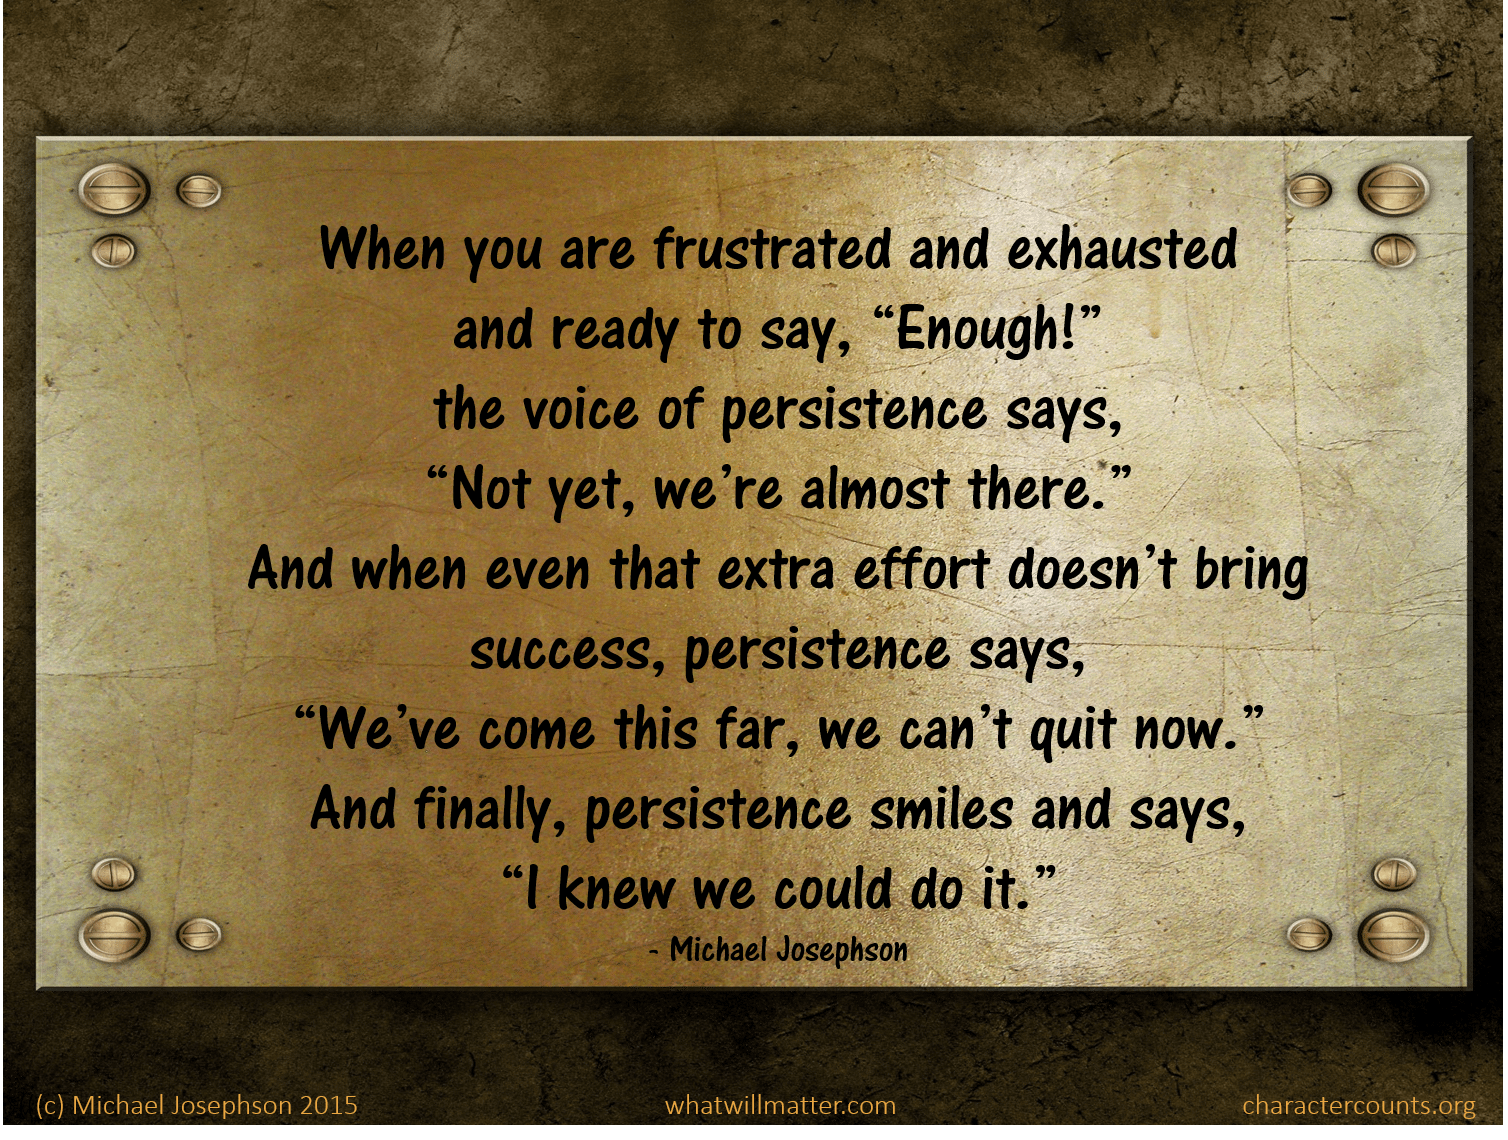 When you are frustrated and exhausted and ready to say ‘enough!’ the voice of persistence says, ‘Not yet, we’re almost there…. Michael Josephson